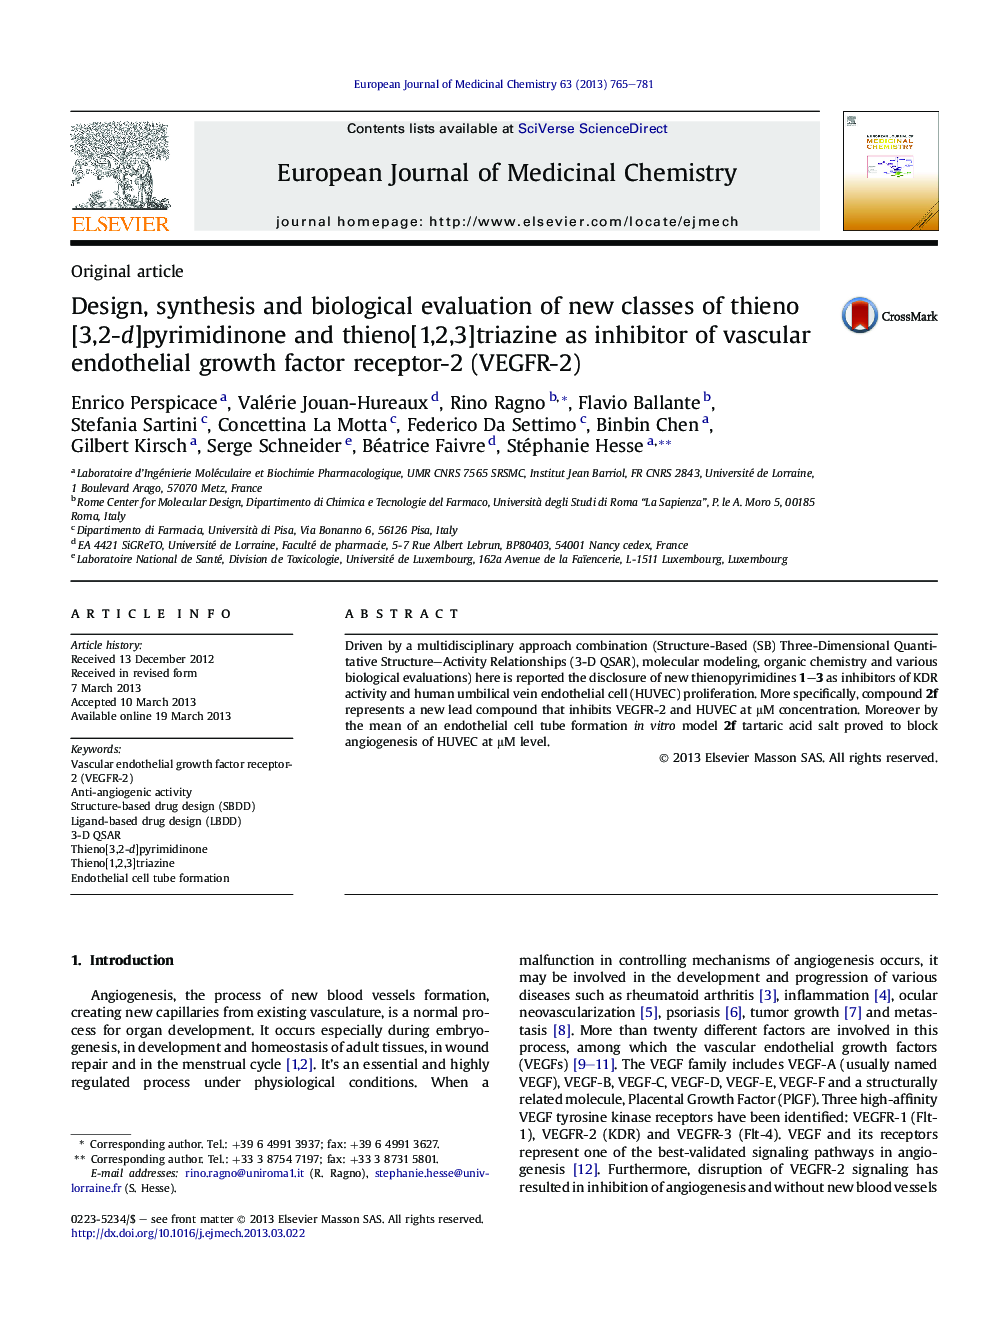 Design, synthesis and biological evaluation of new classes of thieno[3,2-d]pyrimidinone and thieno[1,2,3]triazine as inhibitor of vascular endothelial growth factor receptor-2 (VEGFR-2)